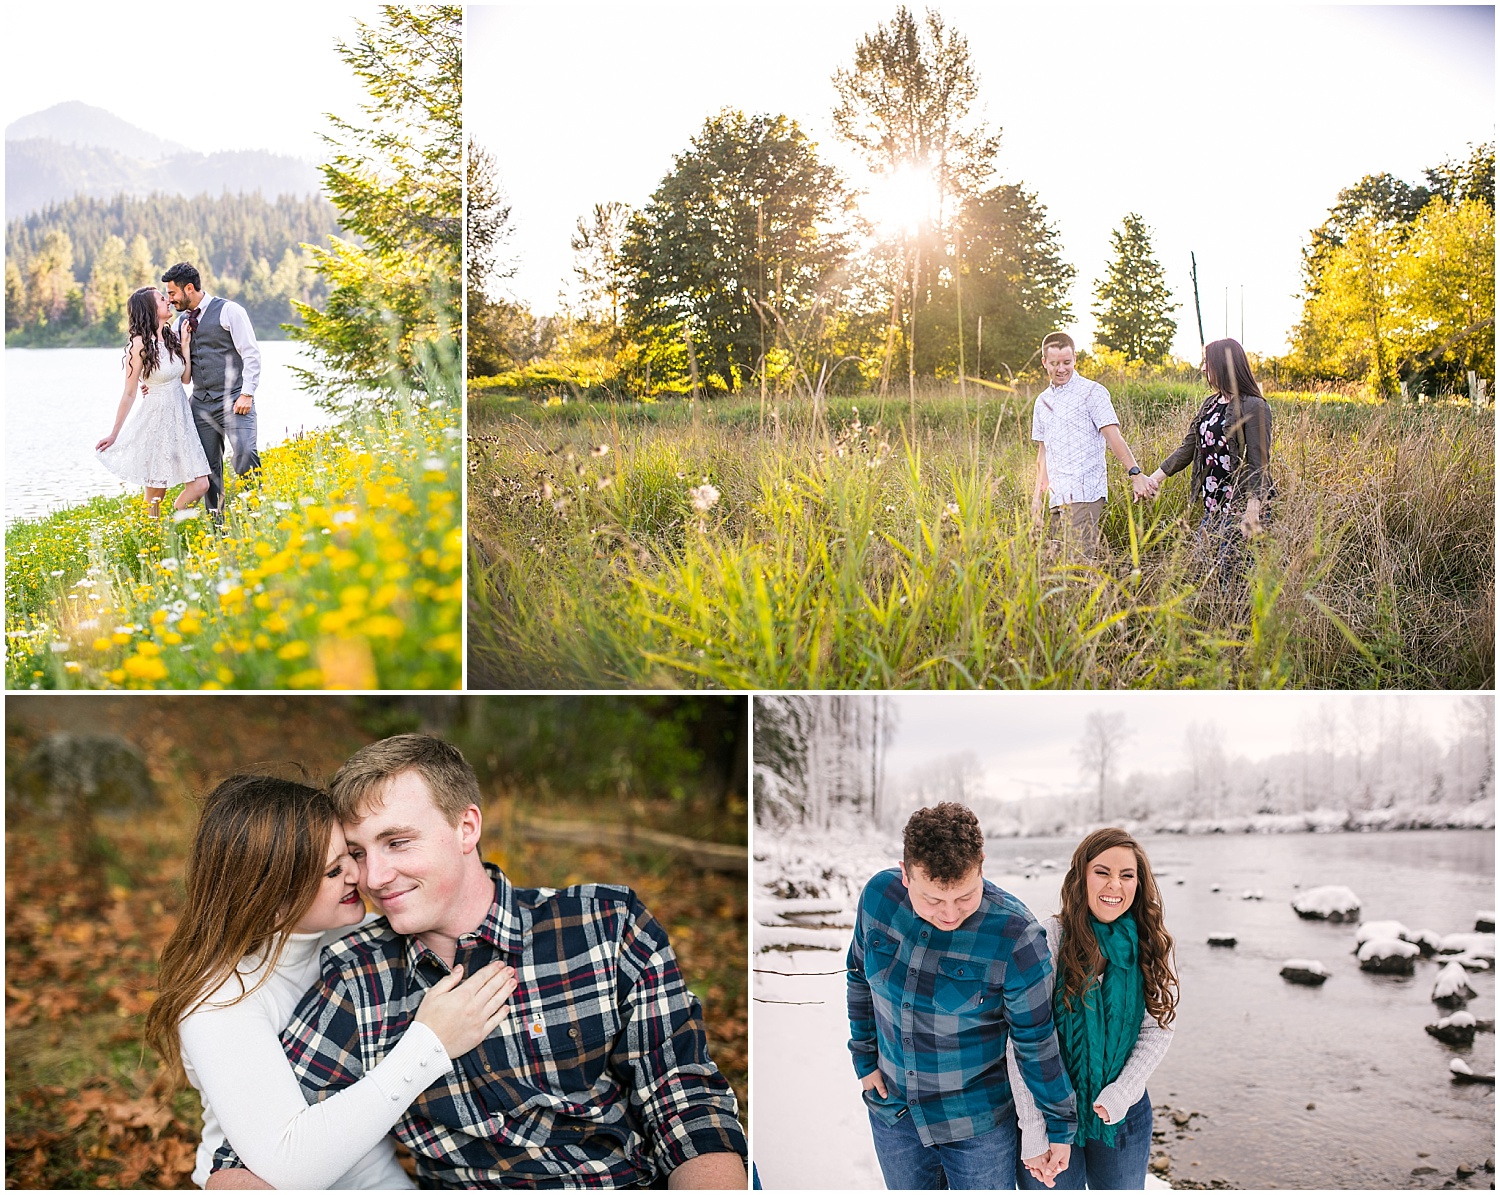 Tips for choosing the location for your engagement pictures: consider the season.